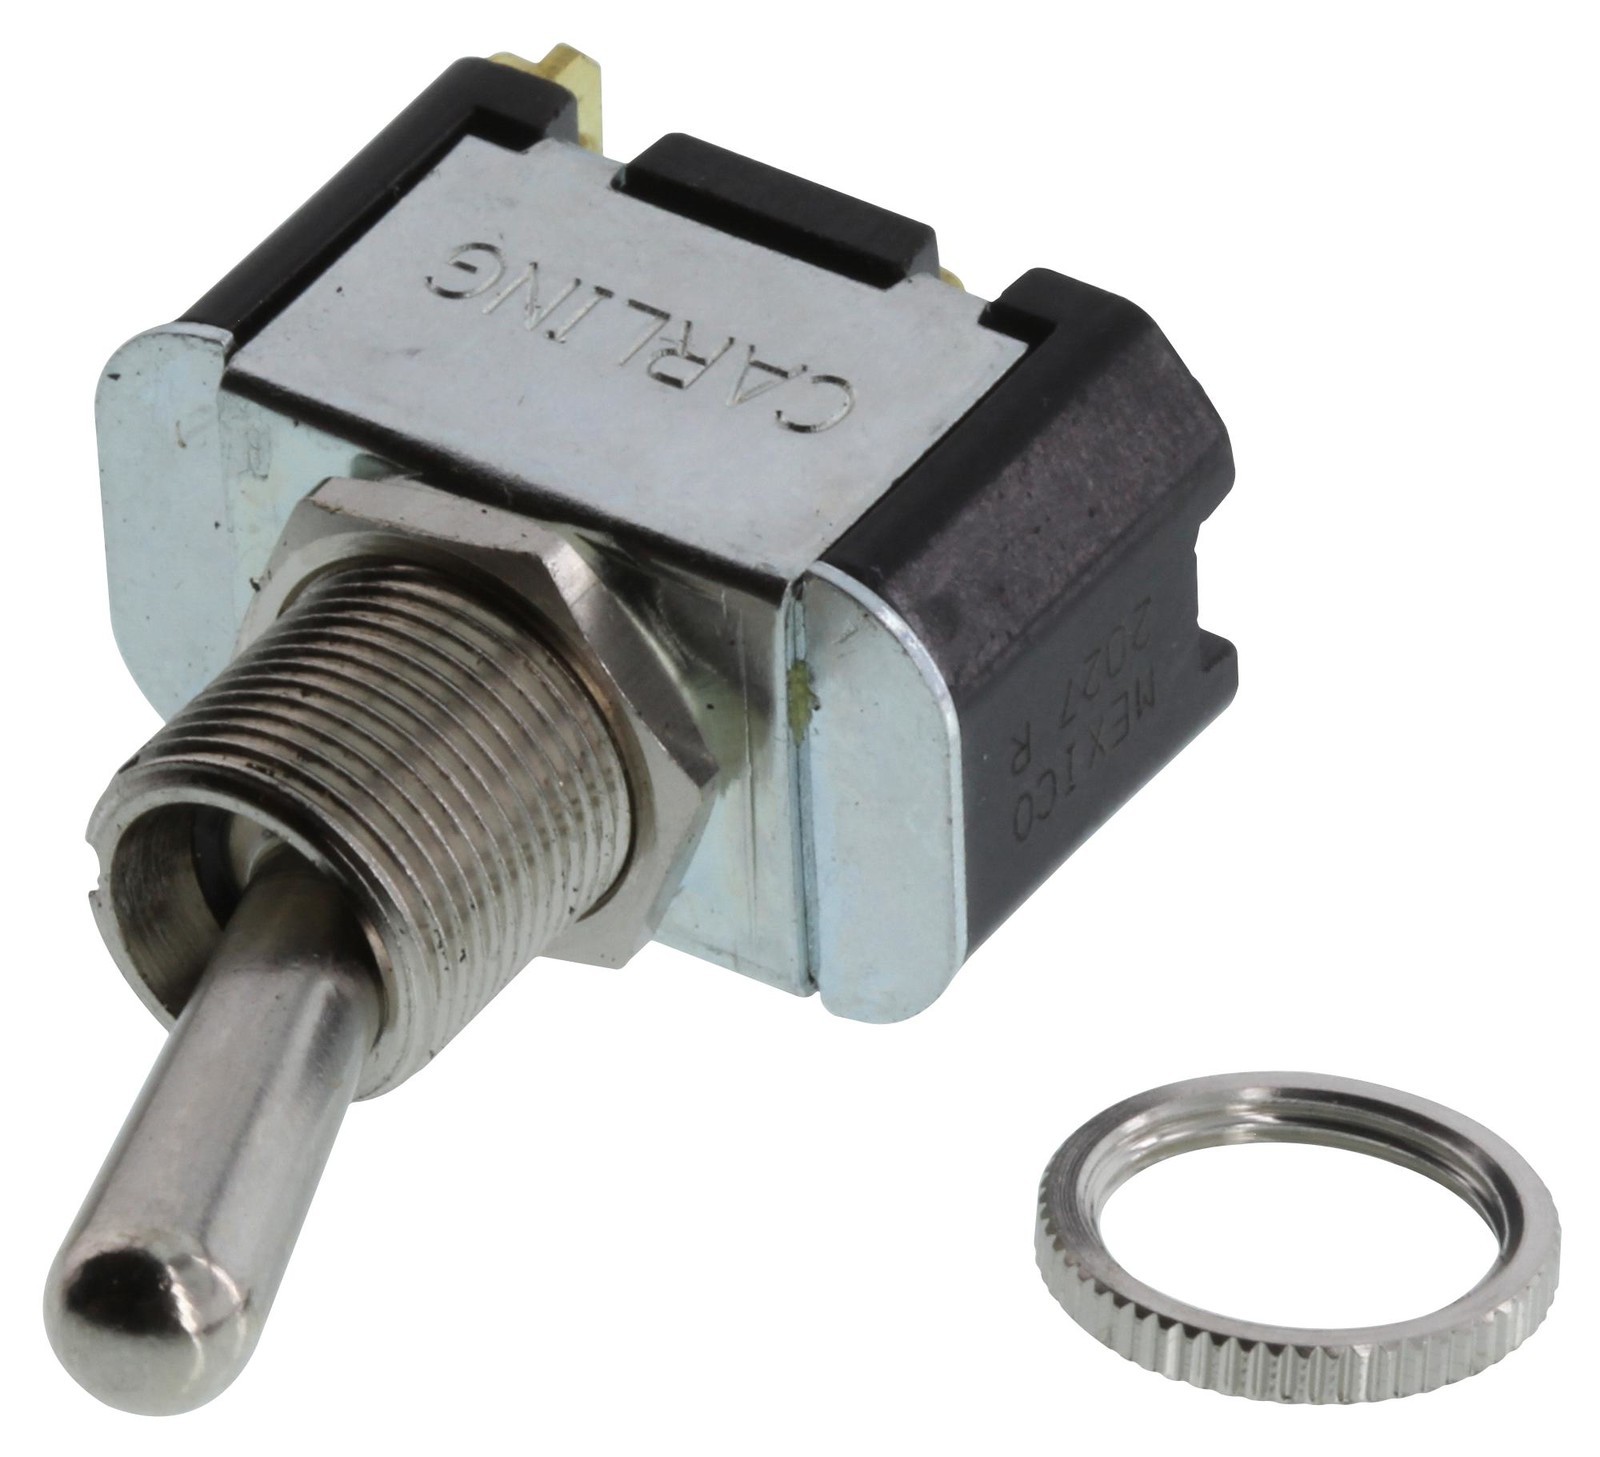 Carling Technologies 2Faa04-78 Toggle Switch, Spst, 20A, 125V, Screw